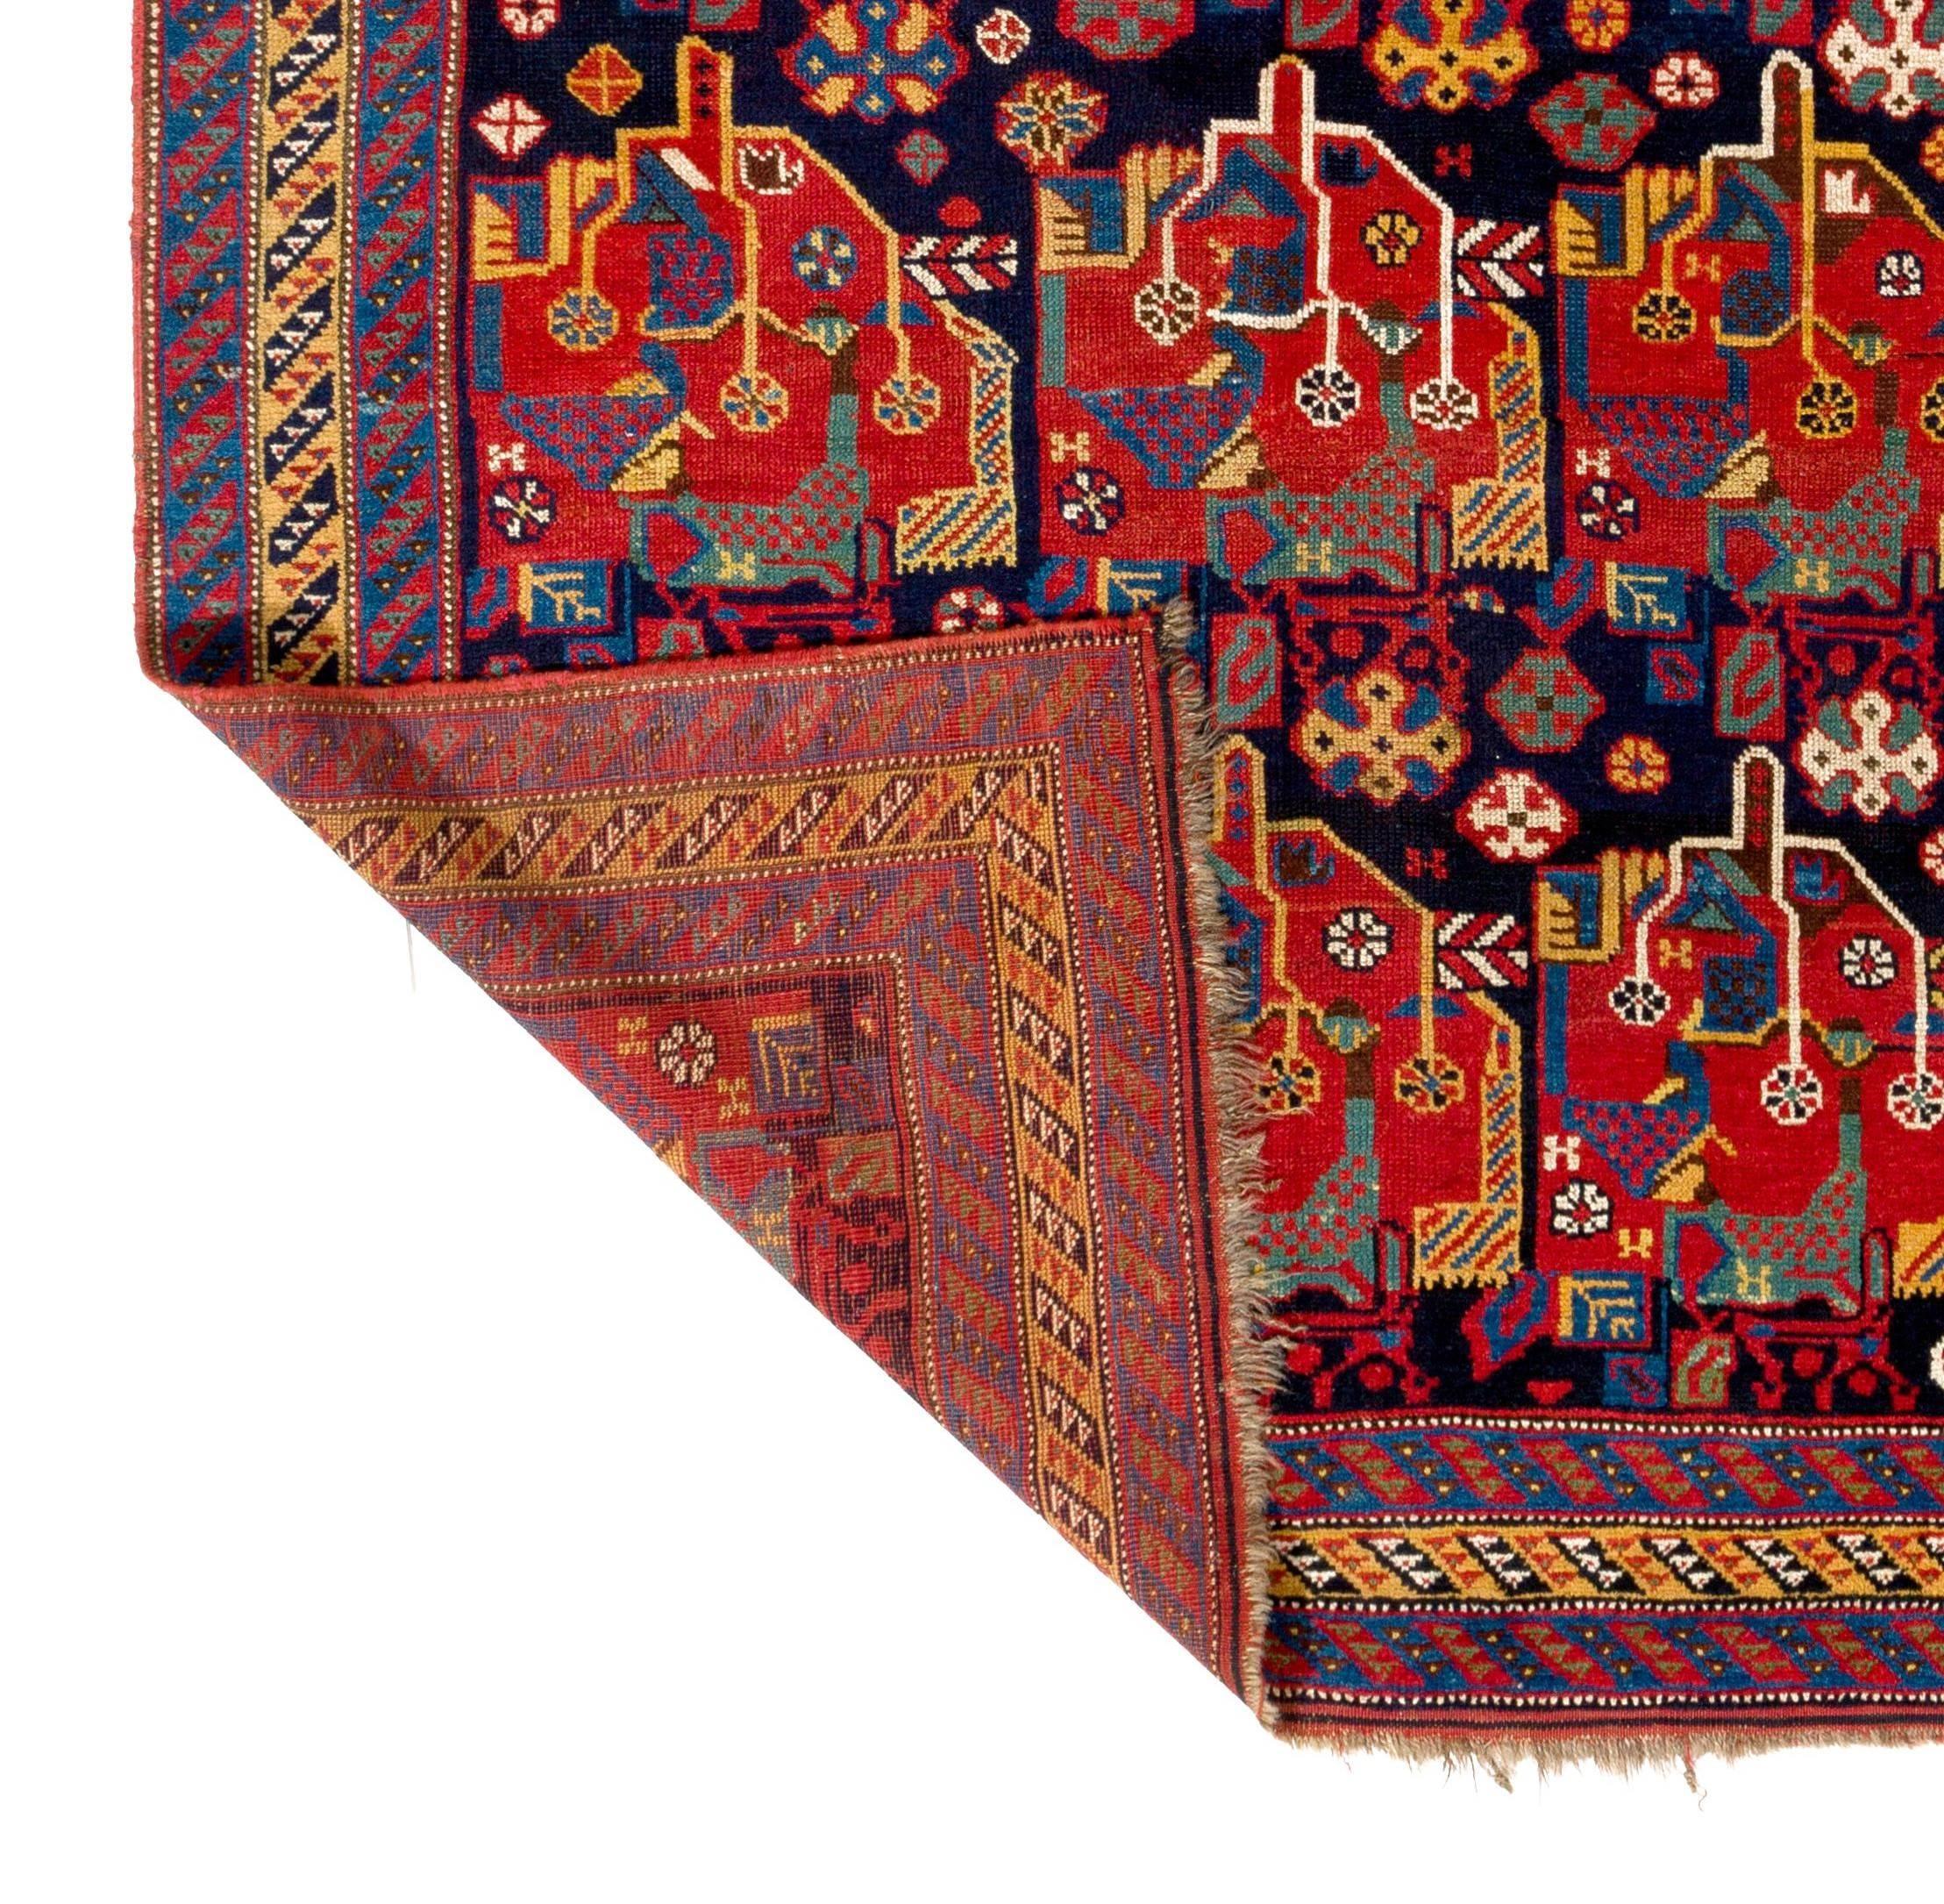 Hand-Knotted 4.4x8 Ft Antique Persian Qashqai Rug. One of a Kind Tribal Oriental Carpet For Sale